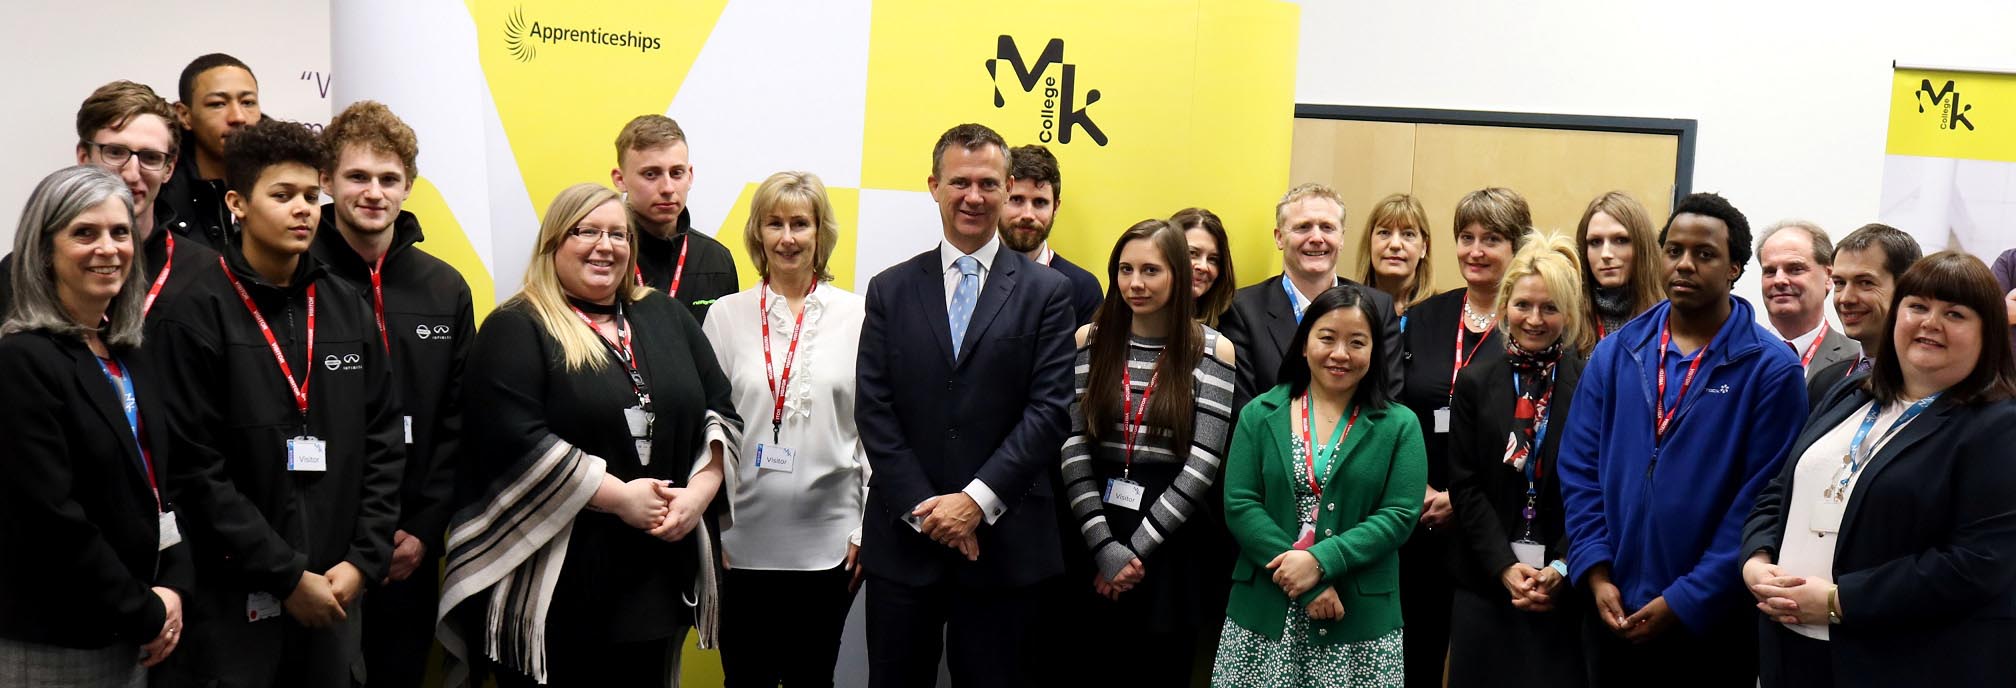 Mark Lancaster with staff and apprentices at MK College sml